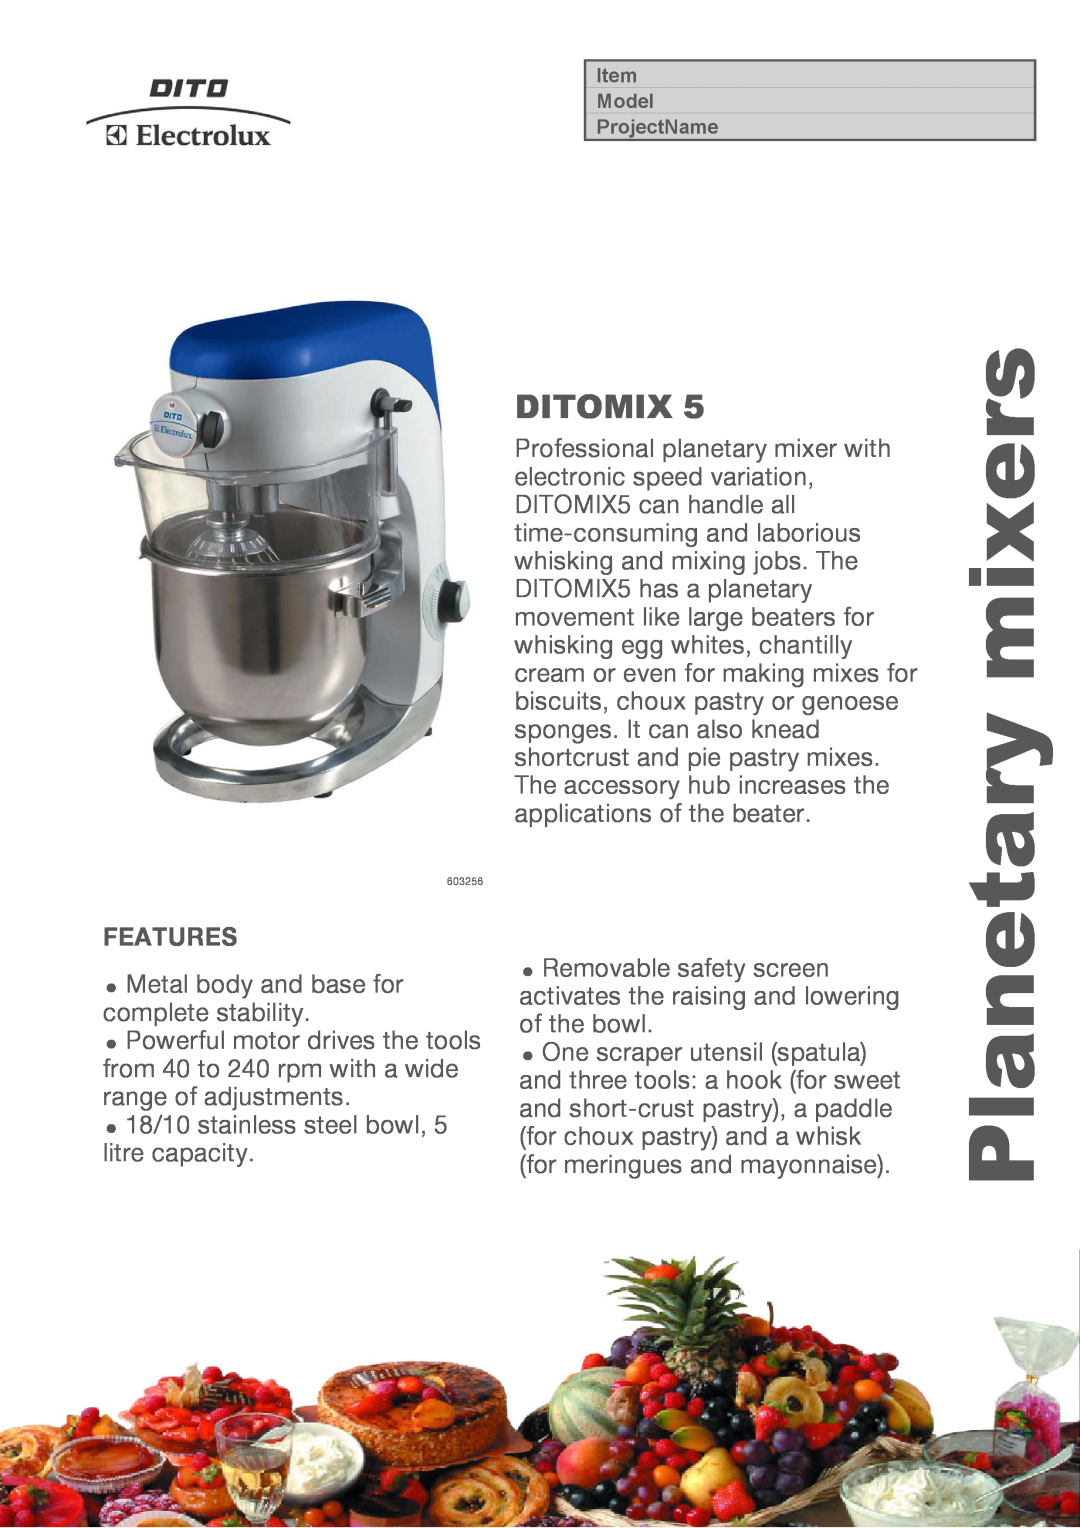 Electrolux DMIX5BL, 603256 manual Features, mixers, Planetary, Ditomix 